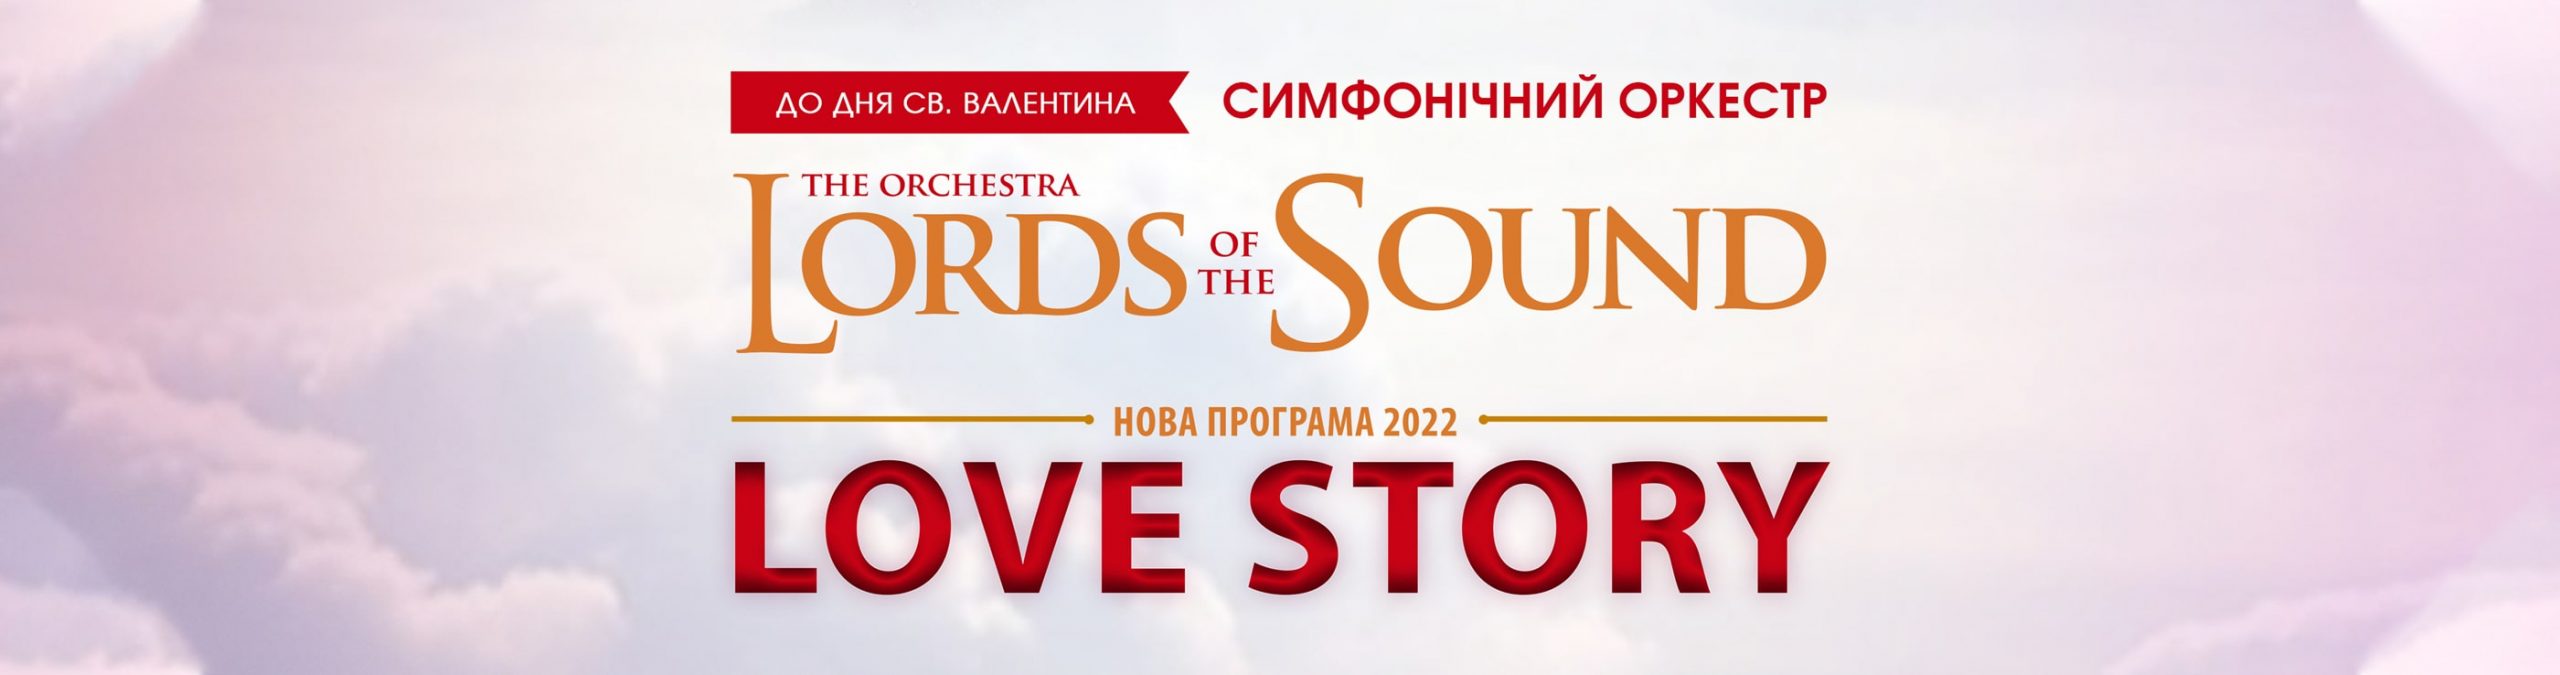 LORDS OF THE SOUND. LOVE STORY TOUR 2022